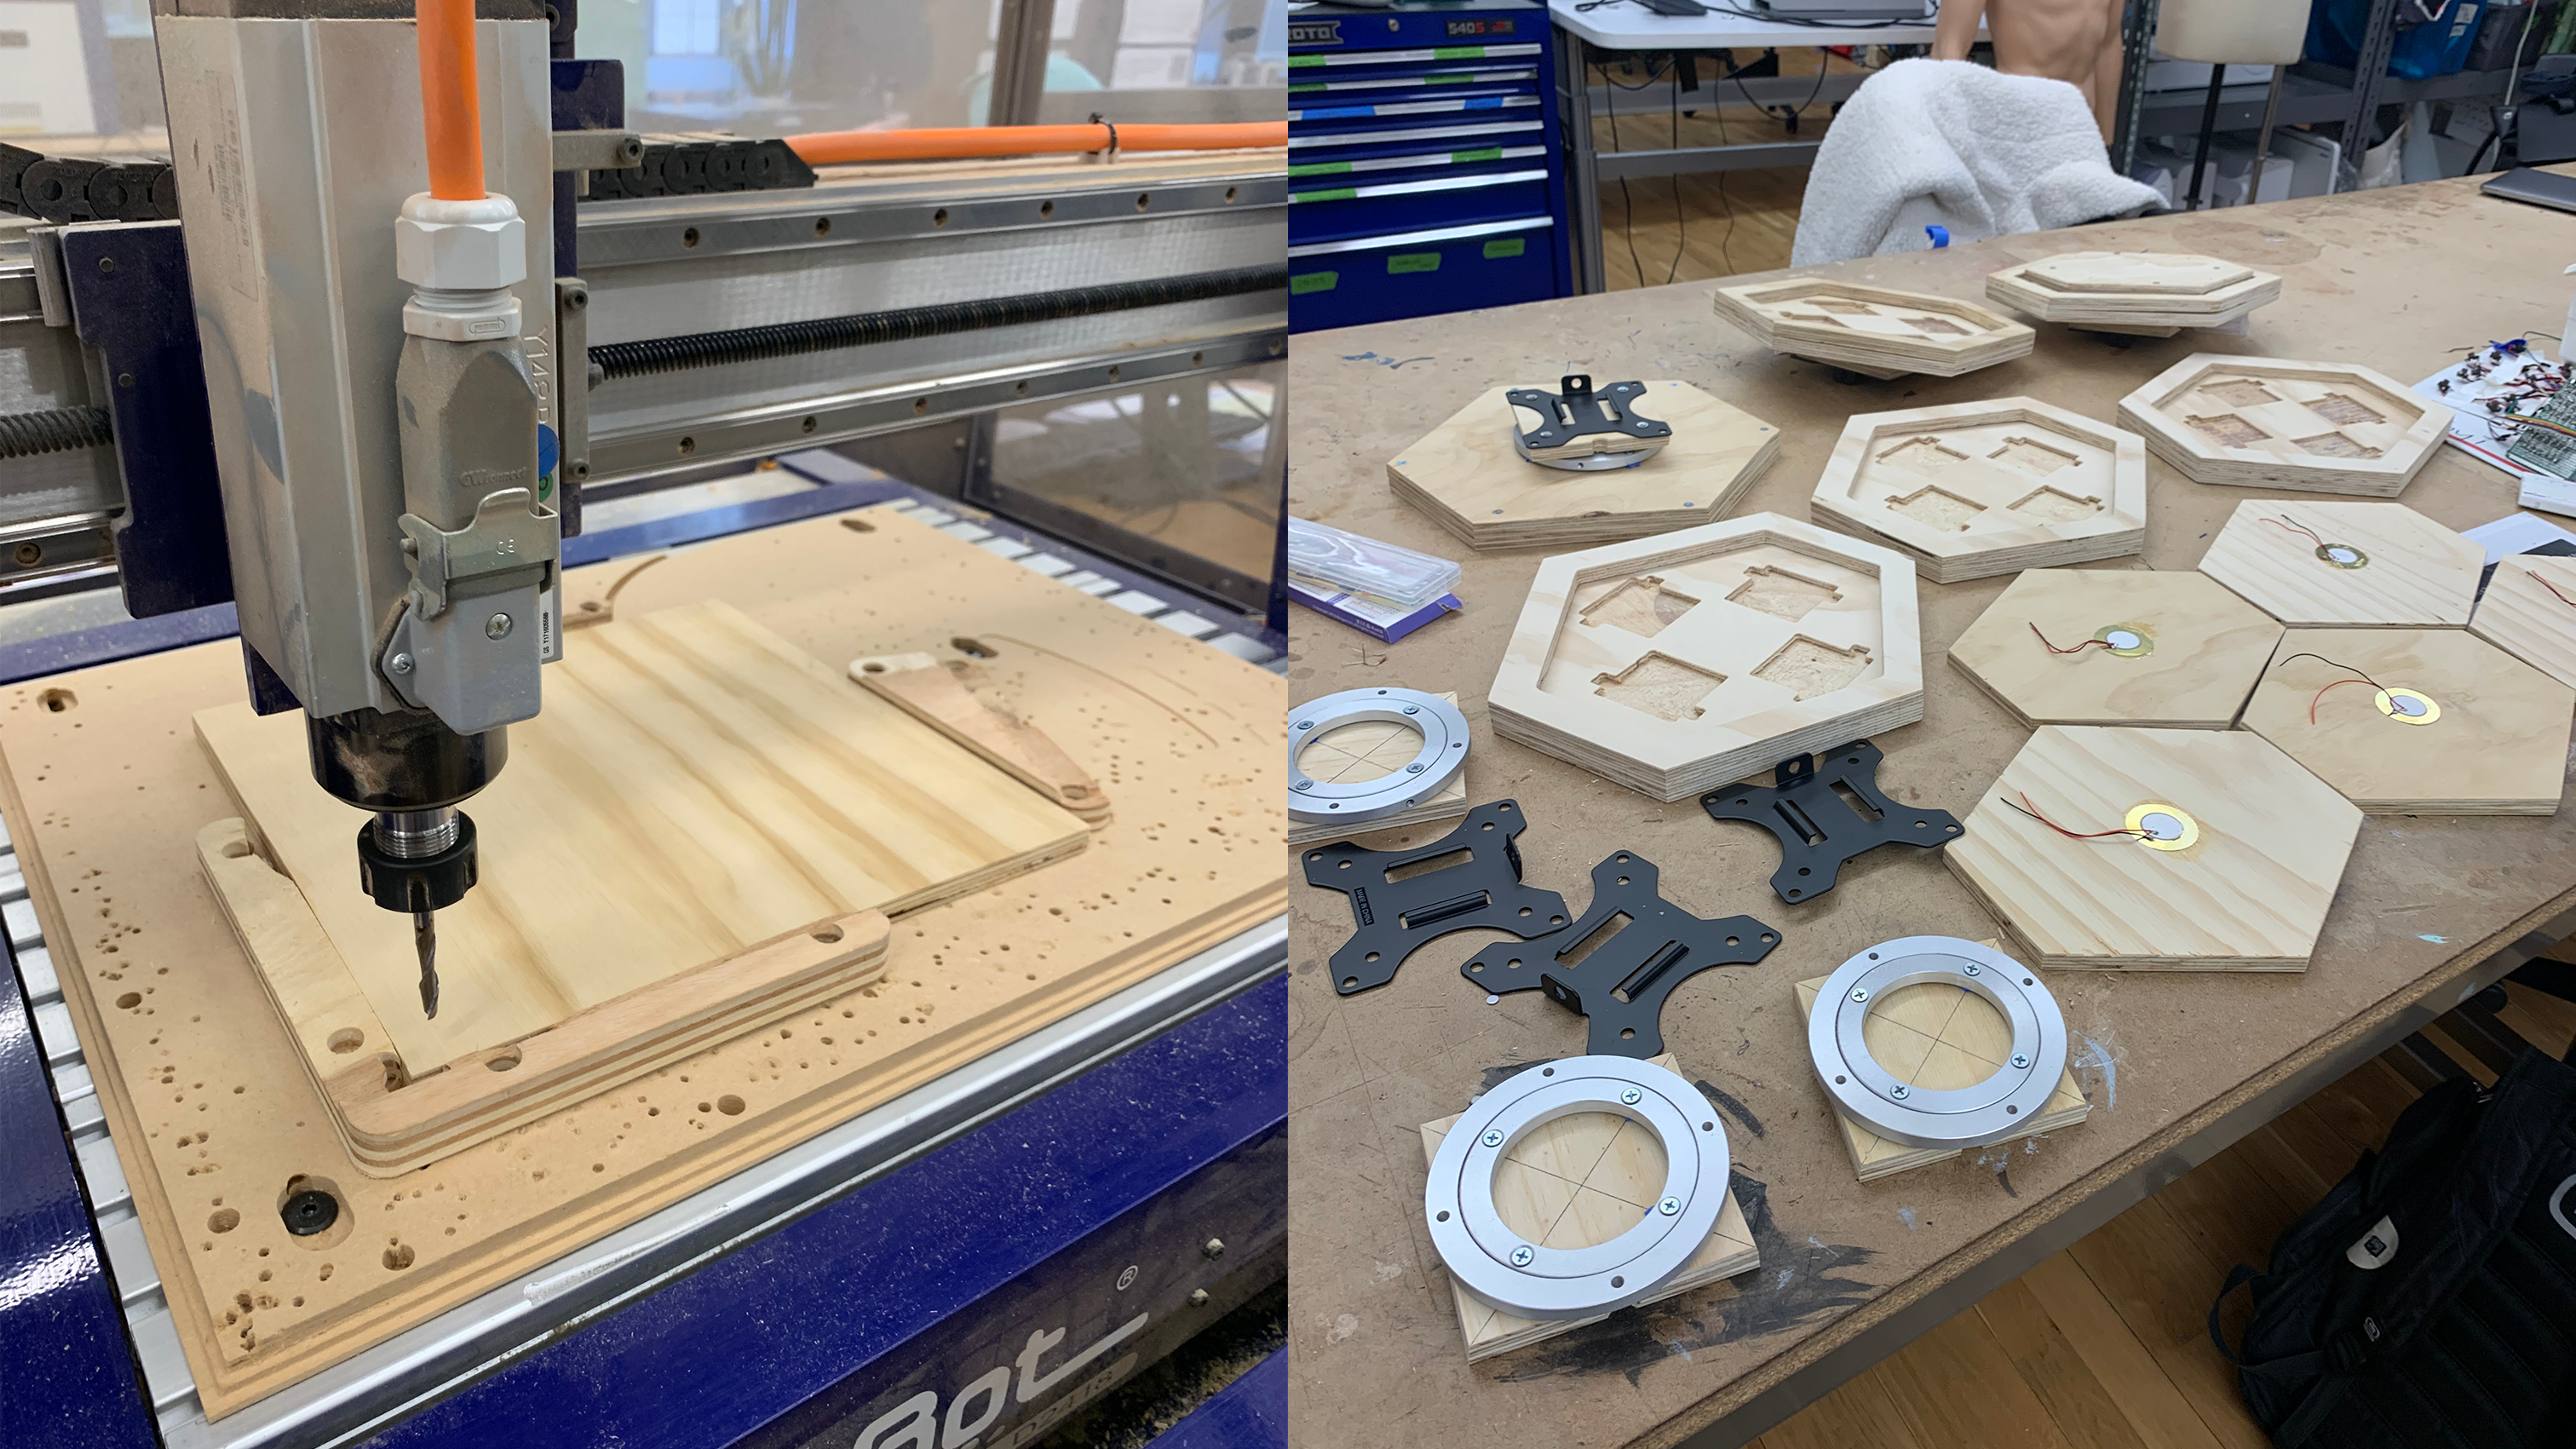 Fabrication of the Spatial Sound Pad Controller, shows the CNC and assembly of Pads